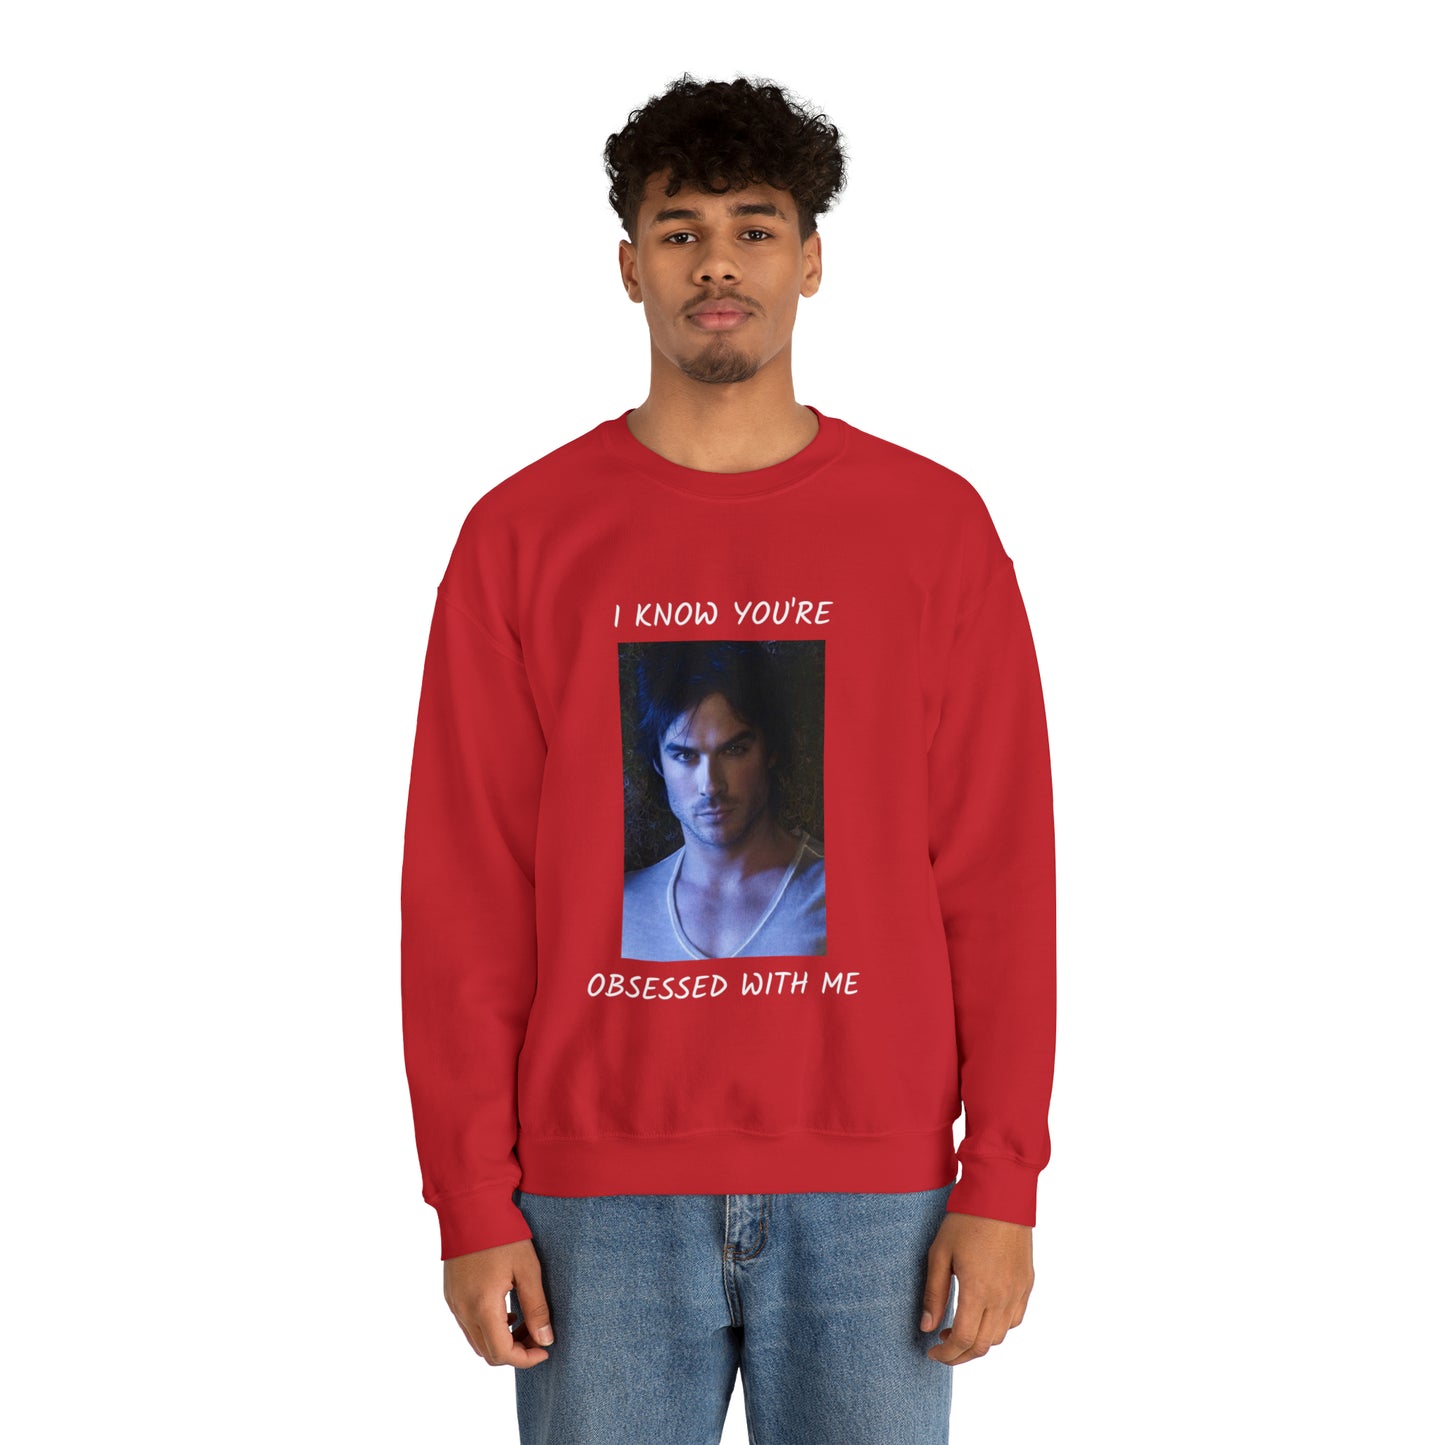 Damon Salvatore Crewneck Sweatshirt I know you're obsessed with me Vampire Diaries